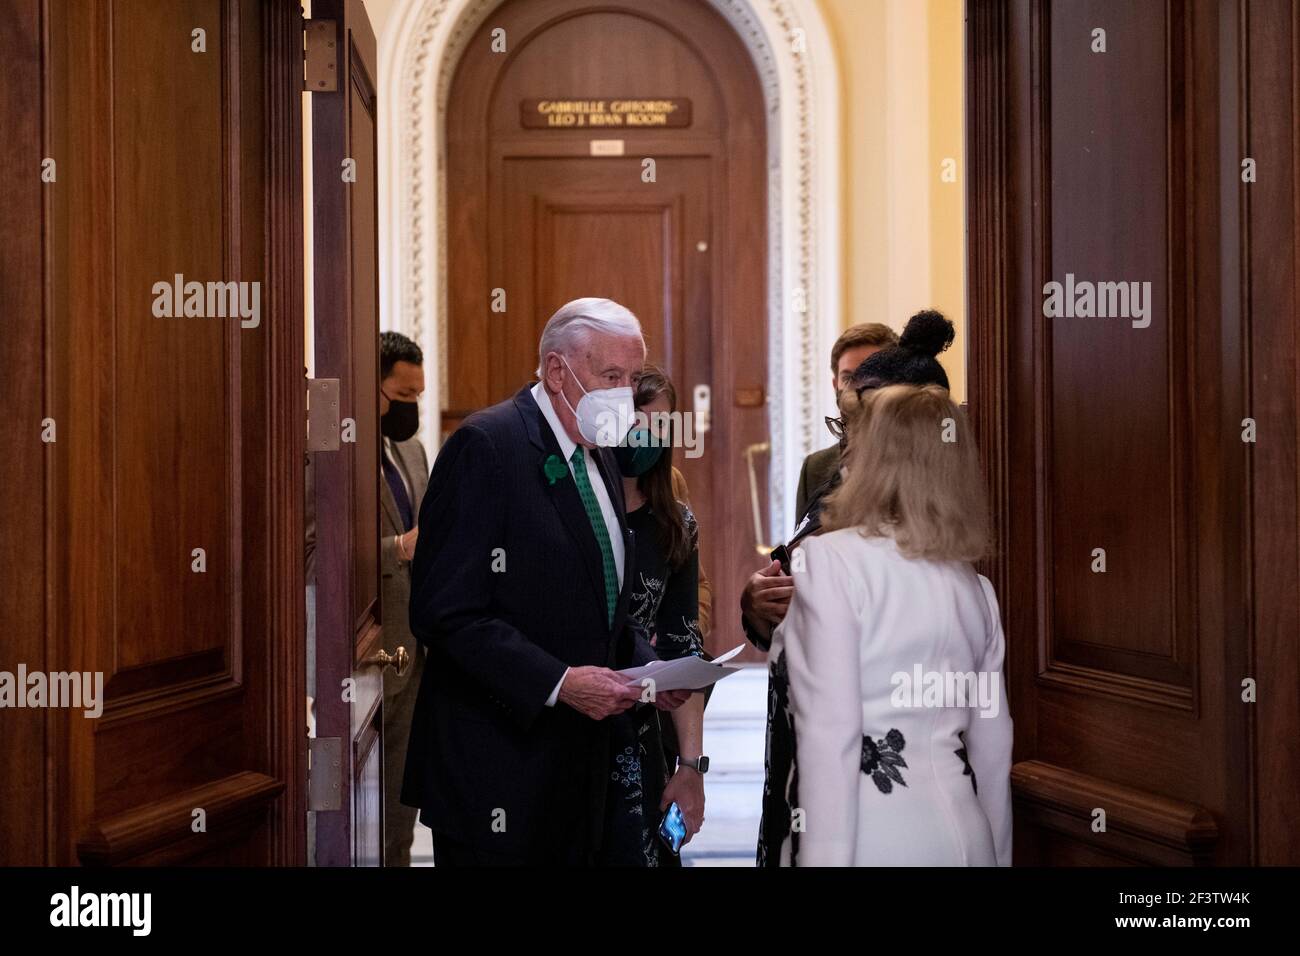 United States Representative Debbie Dingell (Democrat of Michigan), right, chats with United States House Majority Leader Steny Hoyer (Democrat of Maryland) prior to a press conference to begin regarding the Violence Against Women Act, at the U.S. Capitol in Washington, DC, Wednesday, March 17, 2021. Credit: Rod Lamkey/CNP /MediaPunch Stock Photo